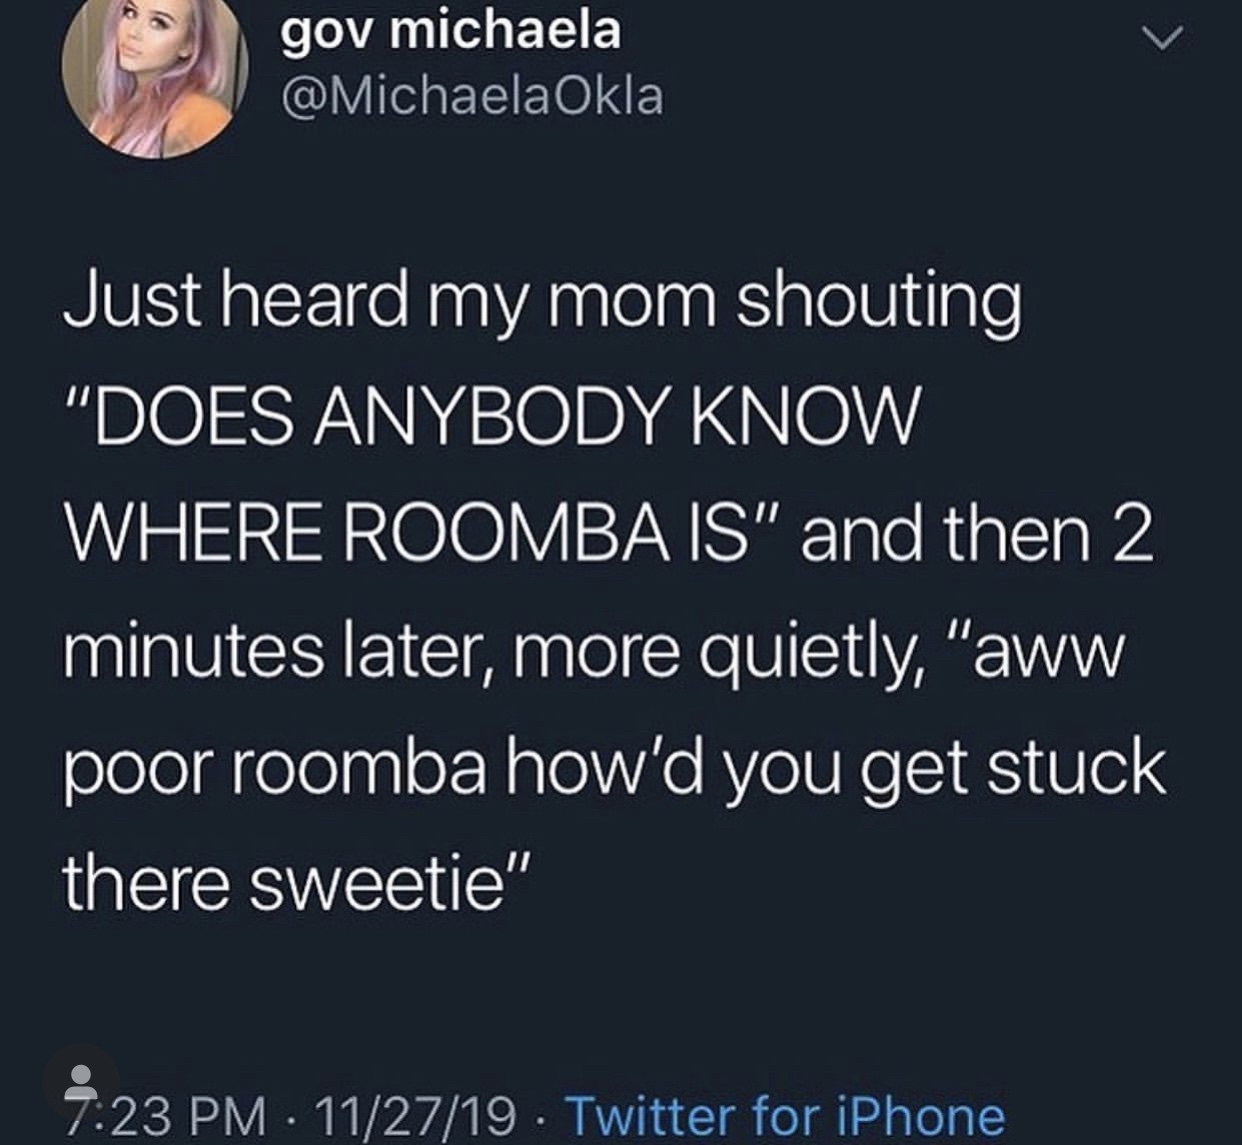 fortnite toxic meme - gov michaela Okla Just heard my mom shouting "Does Anybody Know Where Roomba Is" and then 2 minutes later, more quietly, "aww poor roomba how'd you get stuck there sweetie" 112719. Twitter for iPhone